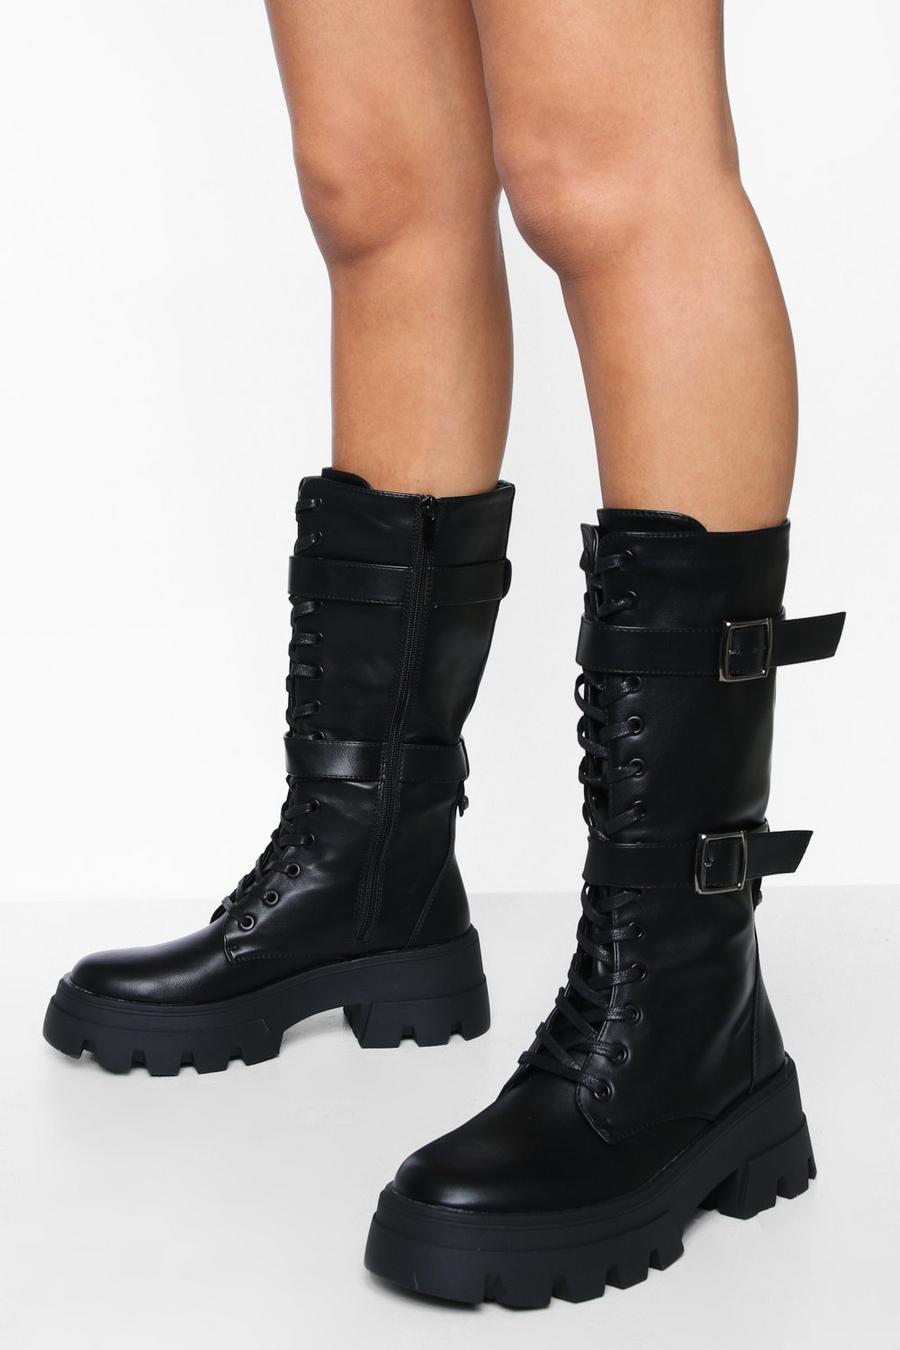 Black Double Buckle Calf High Boots